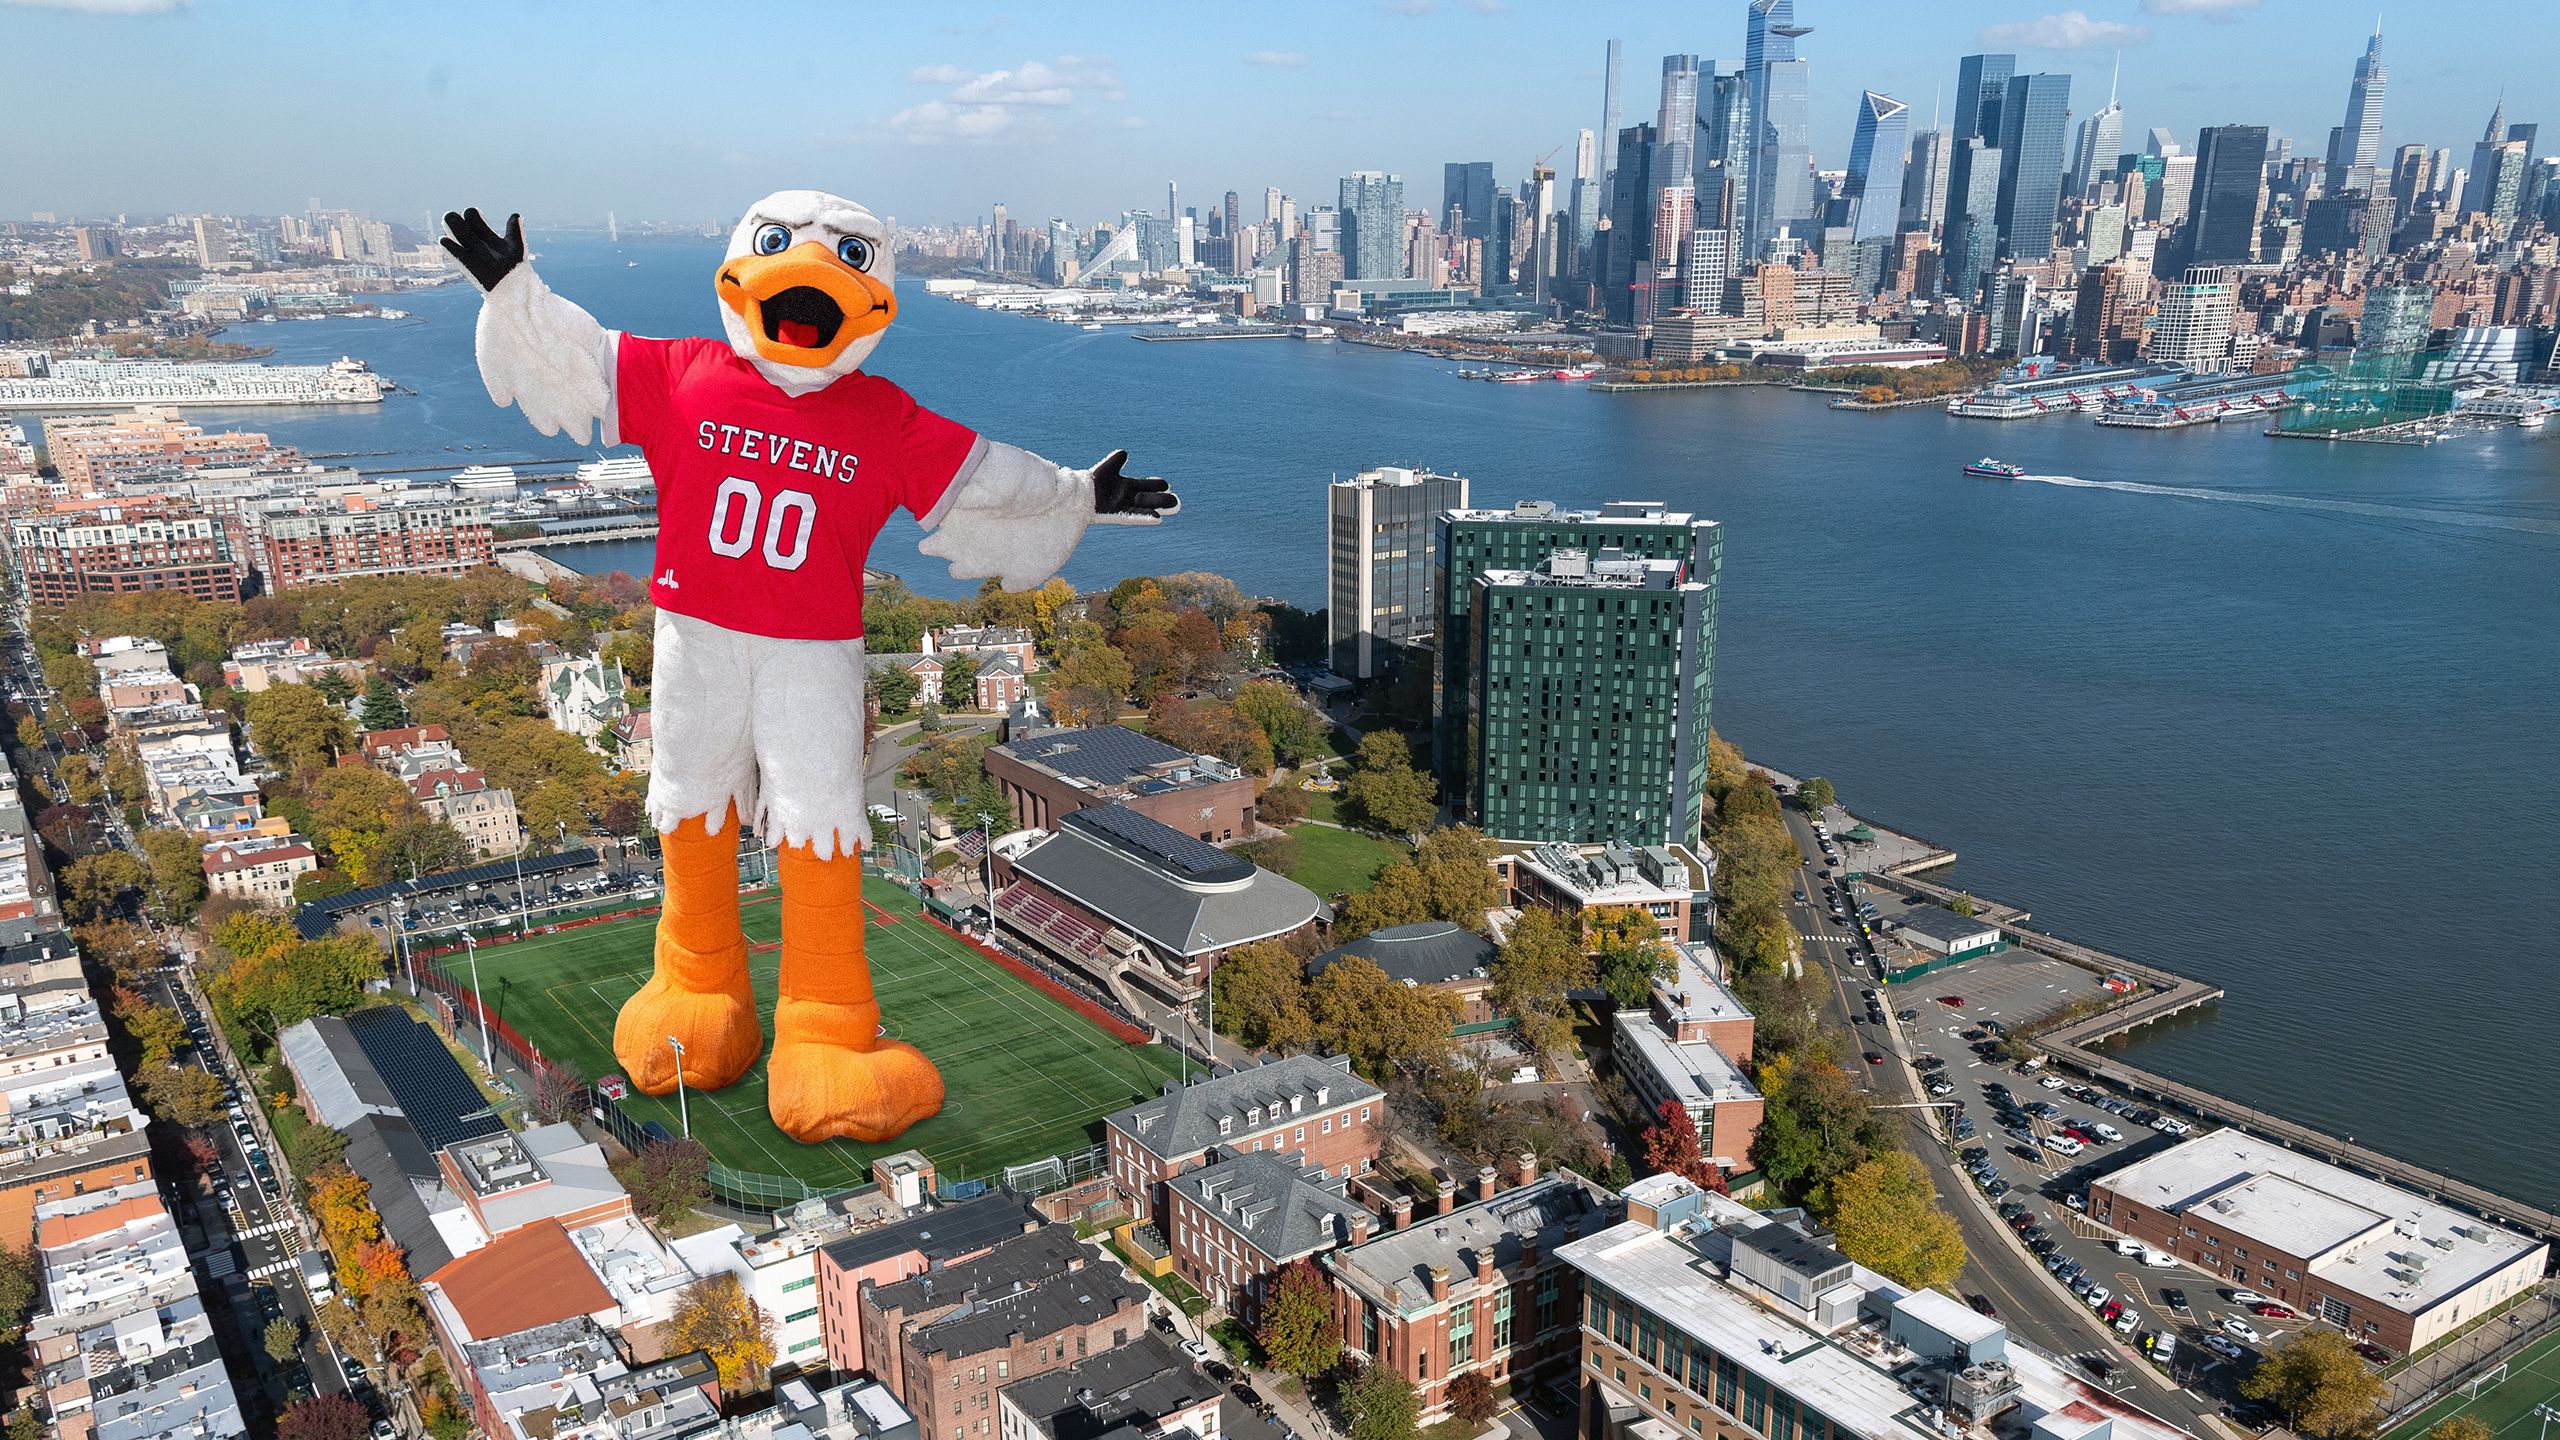 Giant Attila the duck mascot stands on Stevens campus with New York city skyline in background.